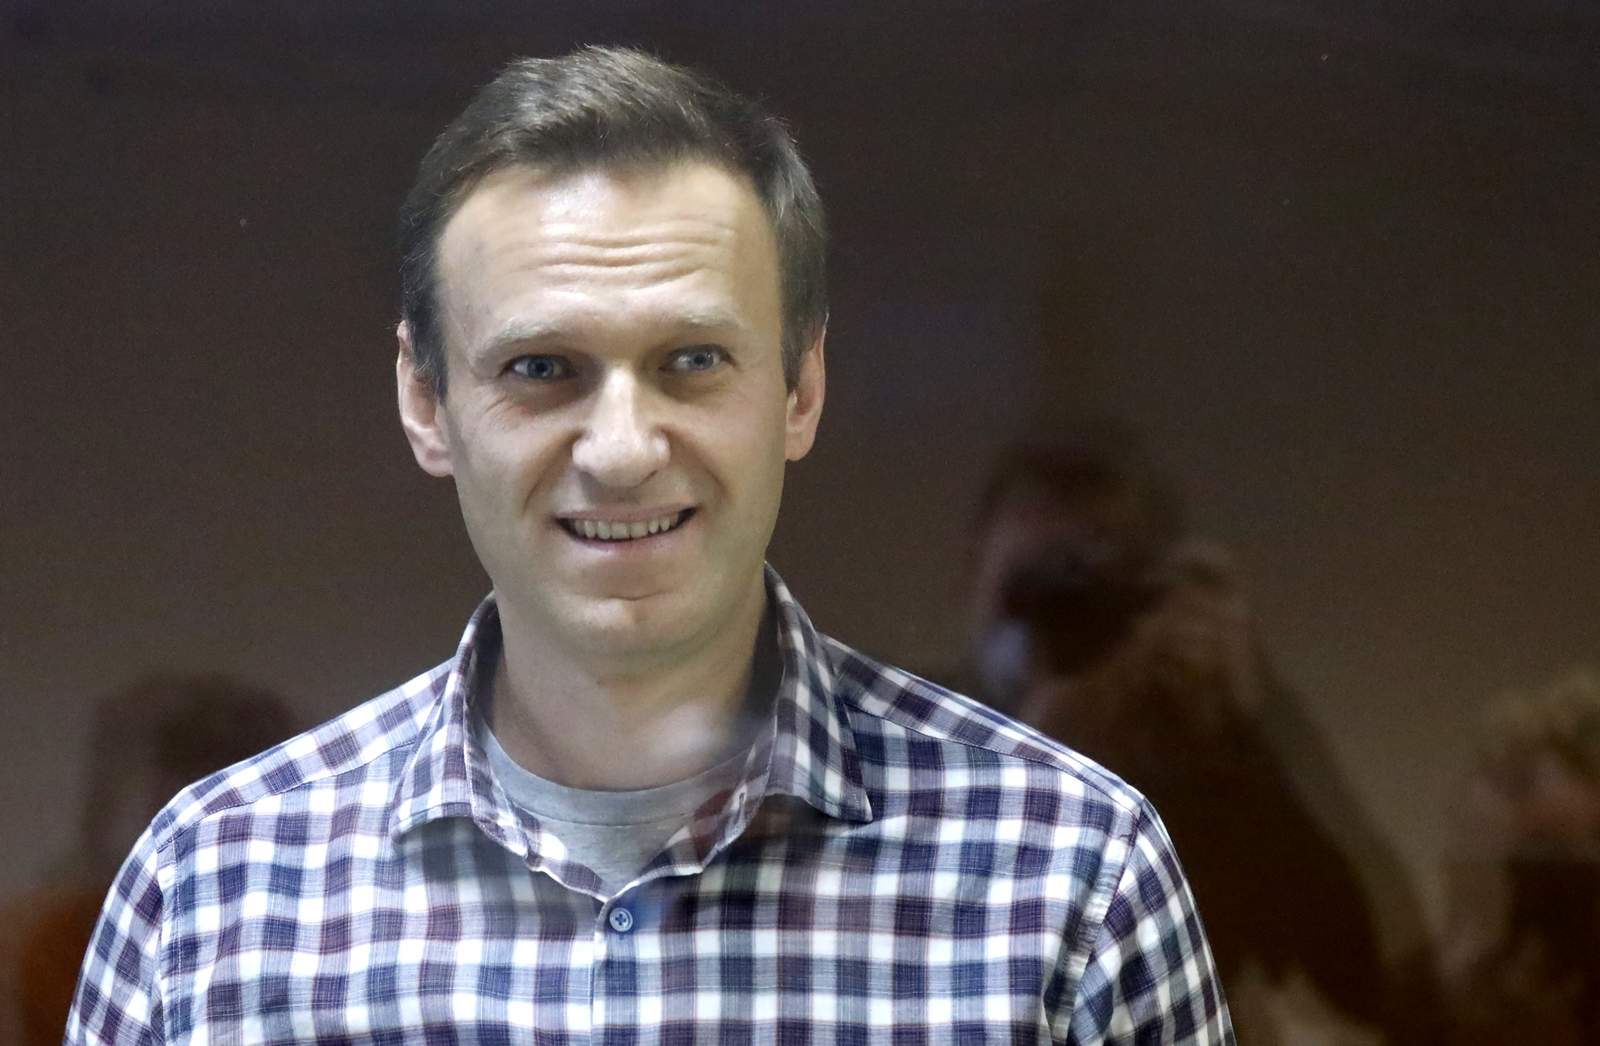 Russia opposition leader Navalny describes prison conditions